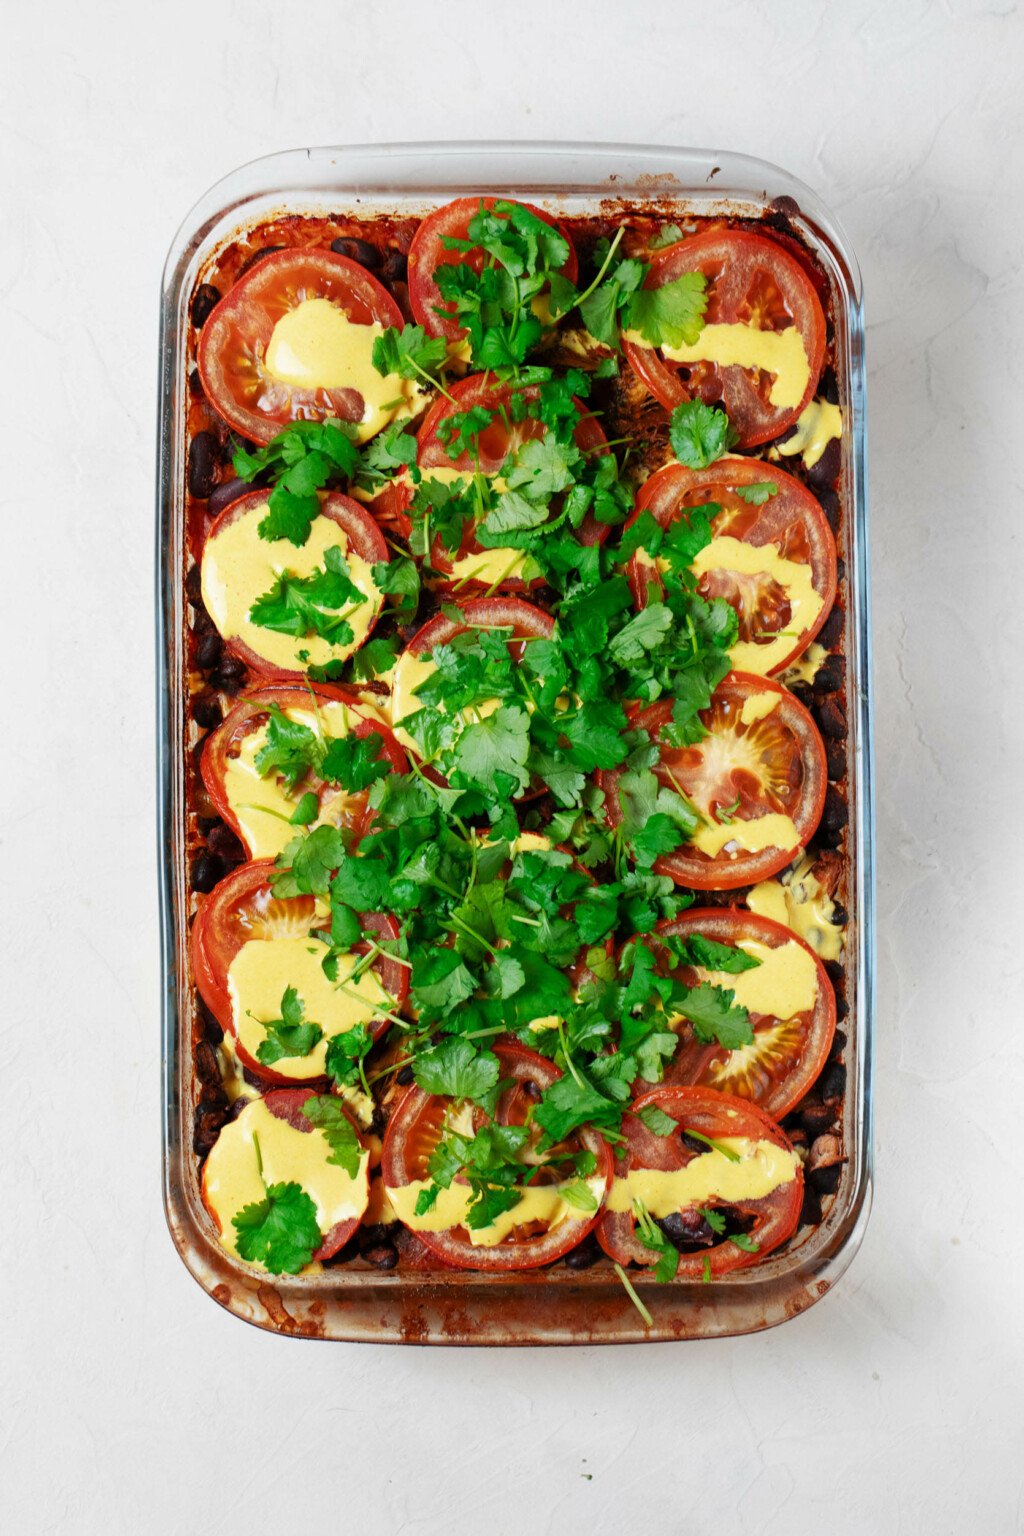 An overhead image of a vegan casserole dish that has been topped with herbs and a pale yellow sauce.